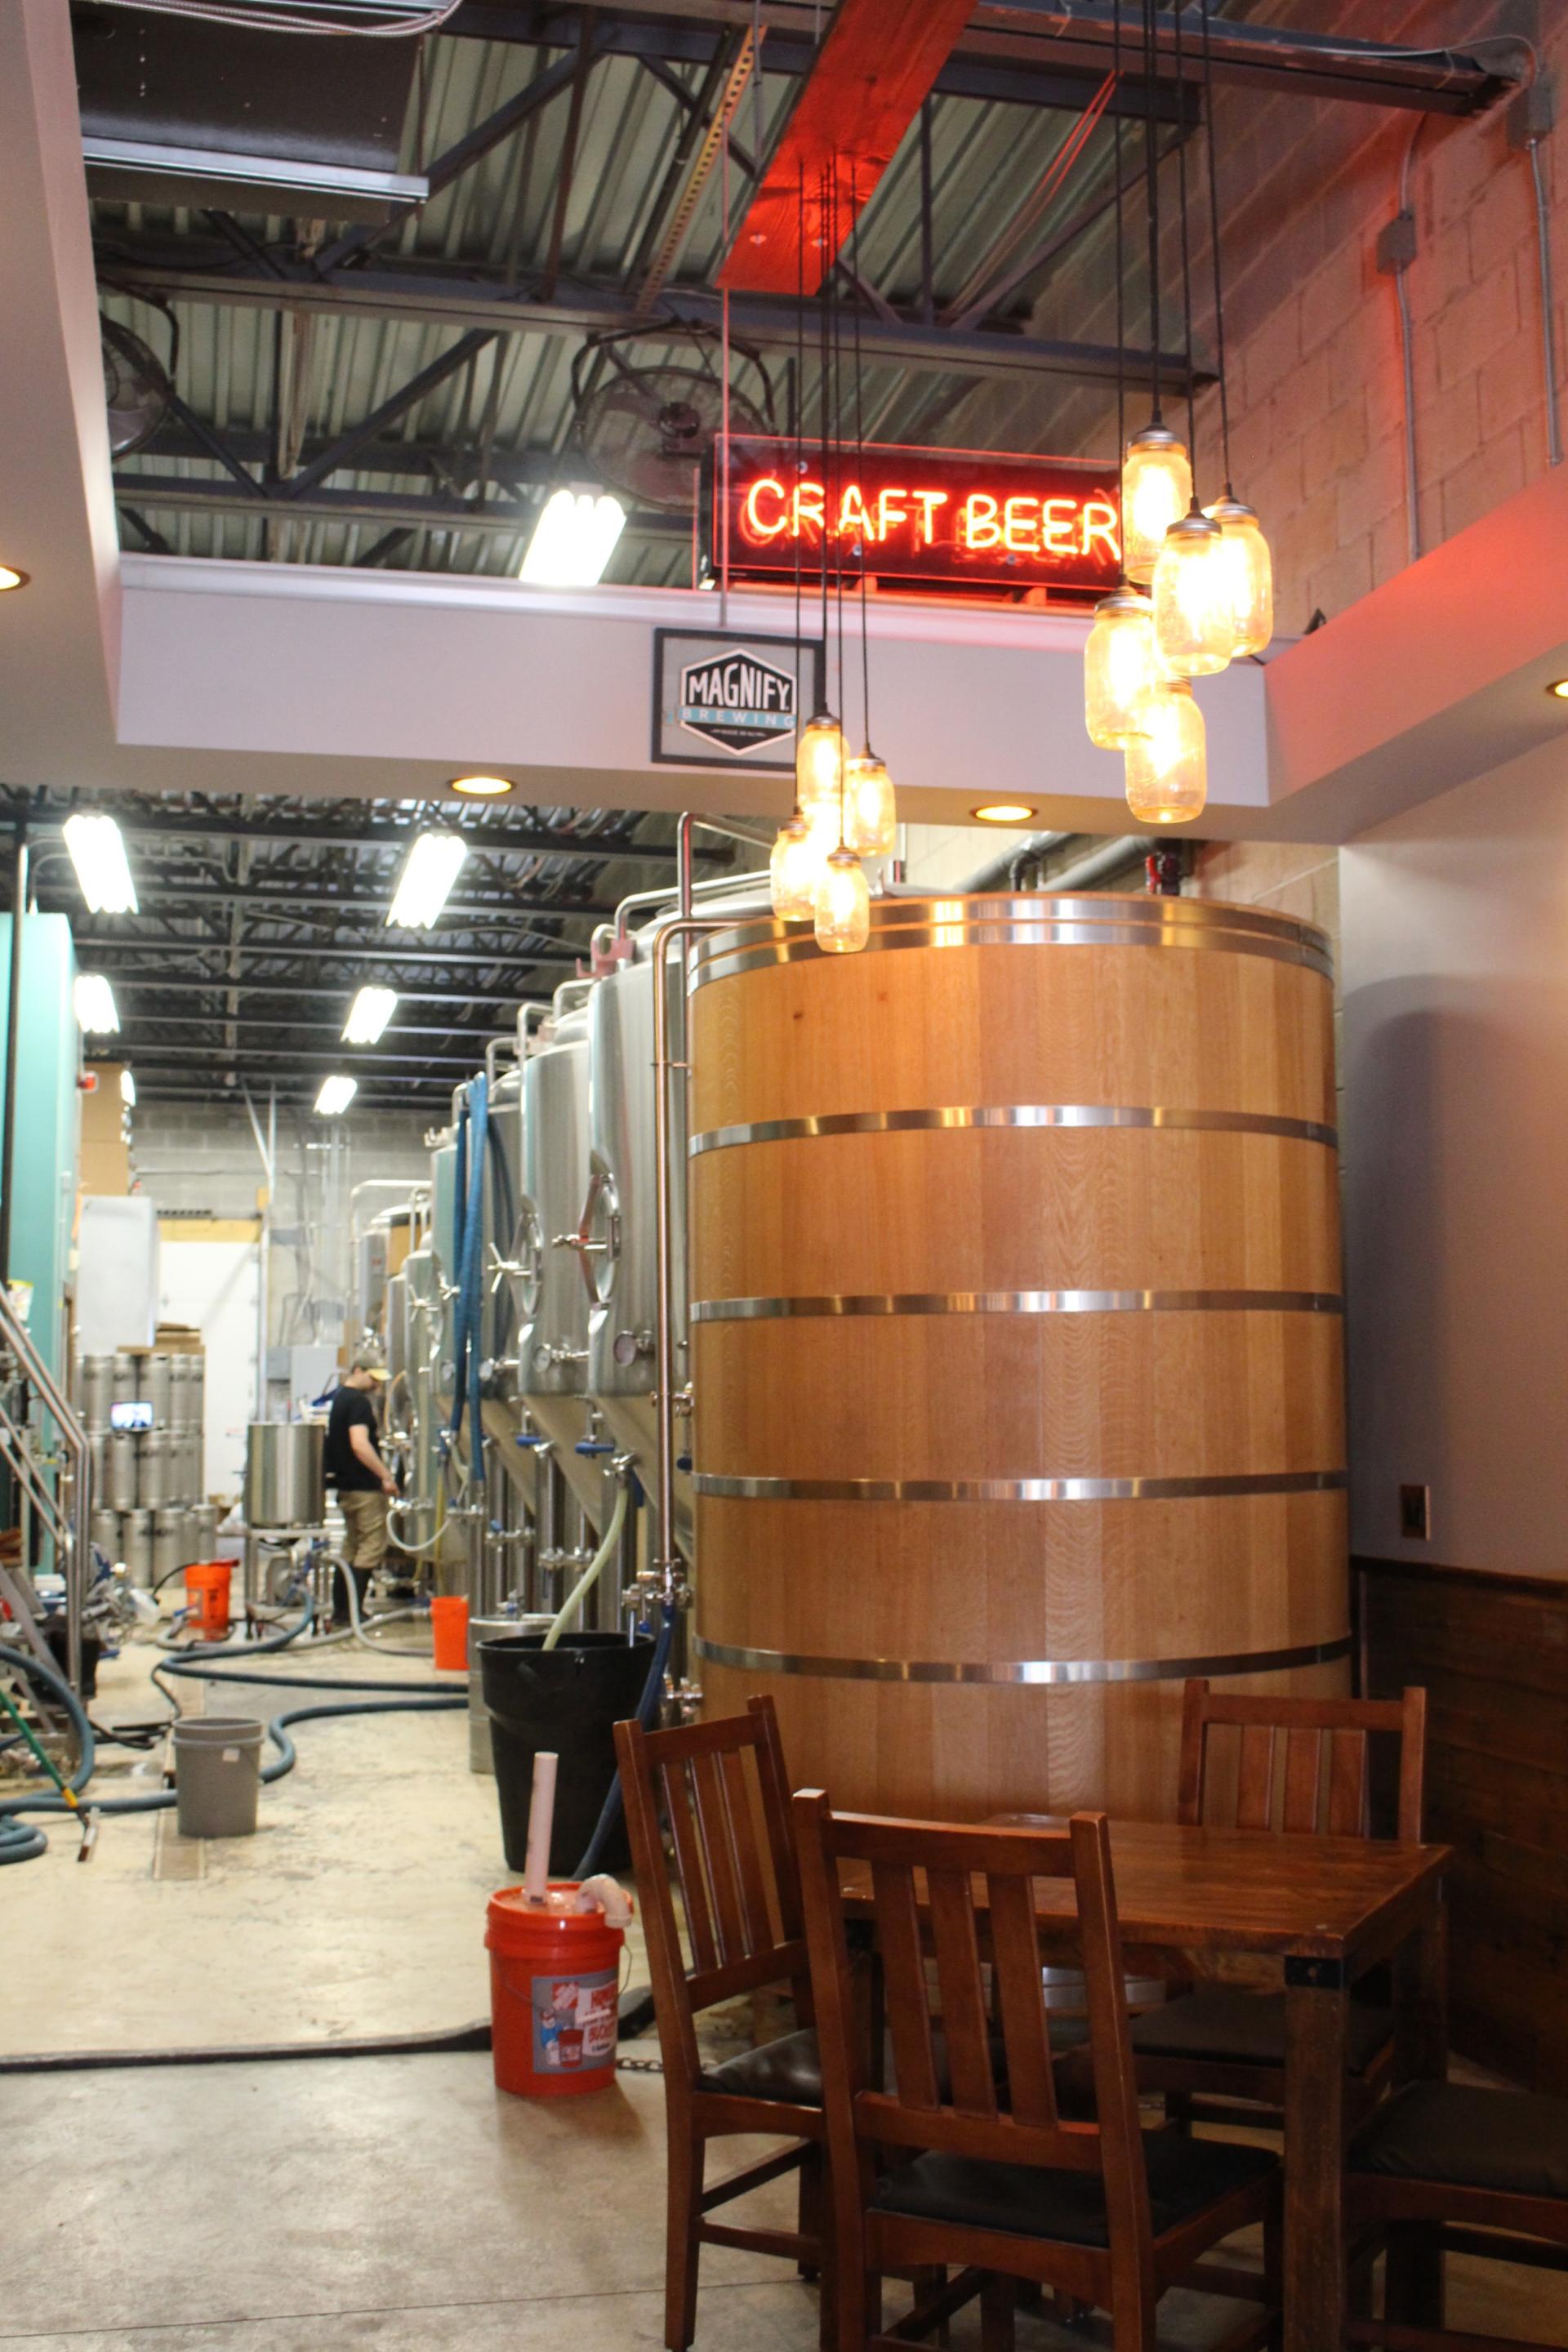 LOCAL: Day Drinking at Magnify Brewing Company